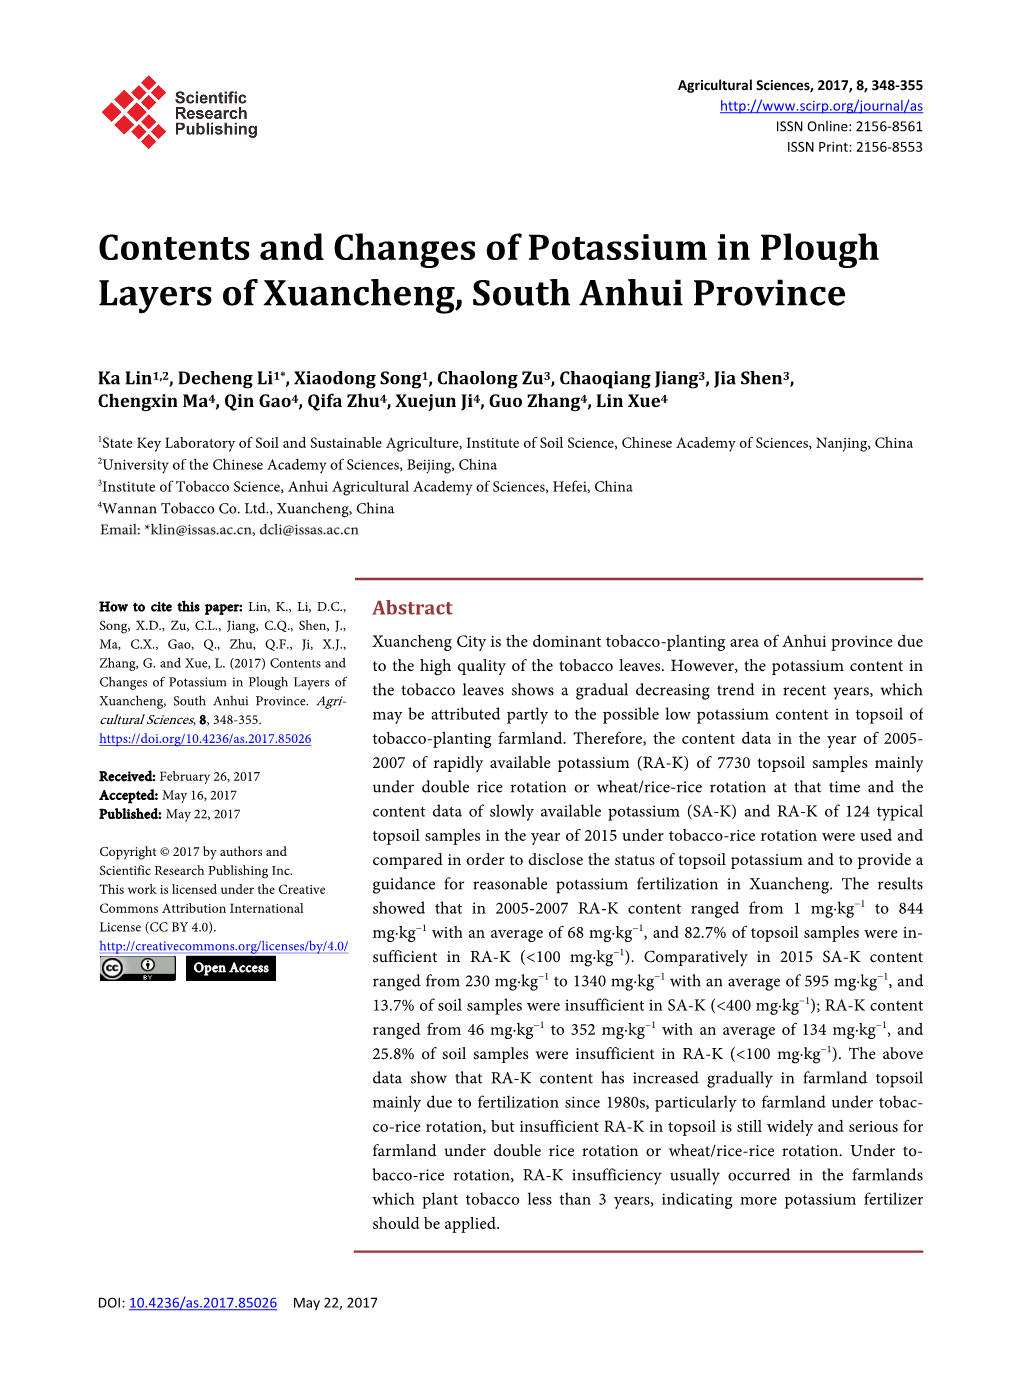 Contents and Changes of Potassium in Plough Layers of Xuancheng, South Anhui Province